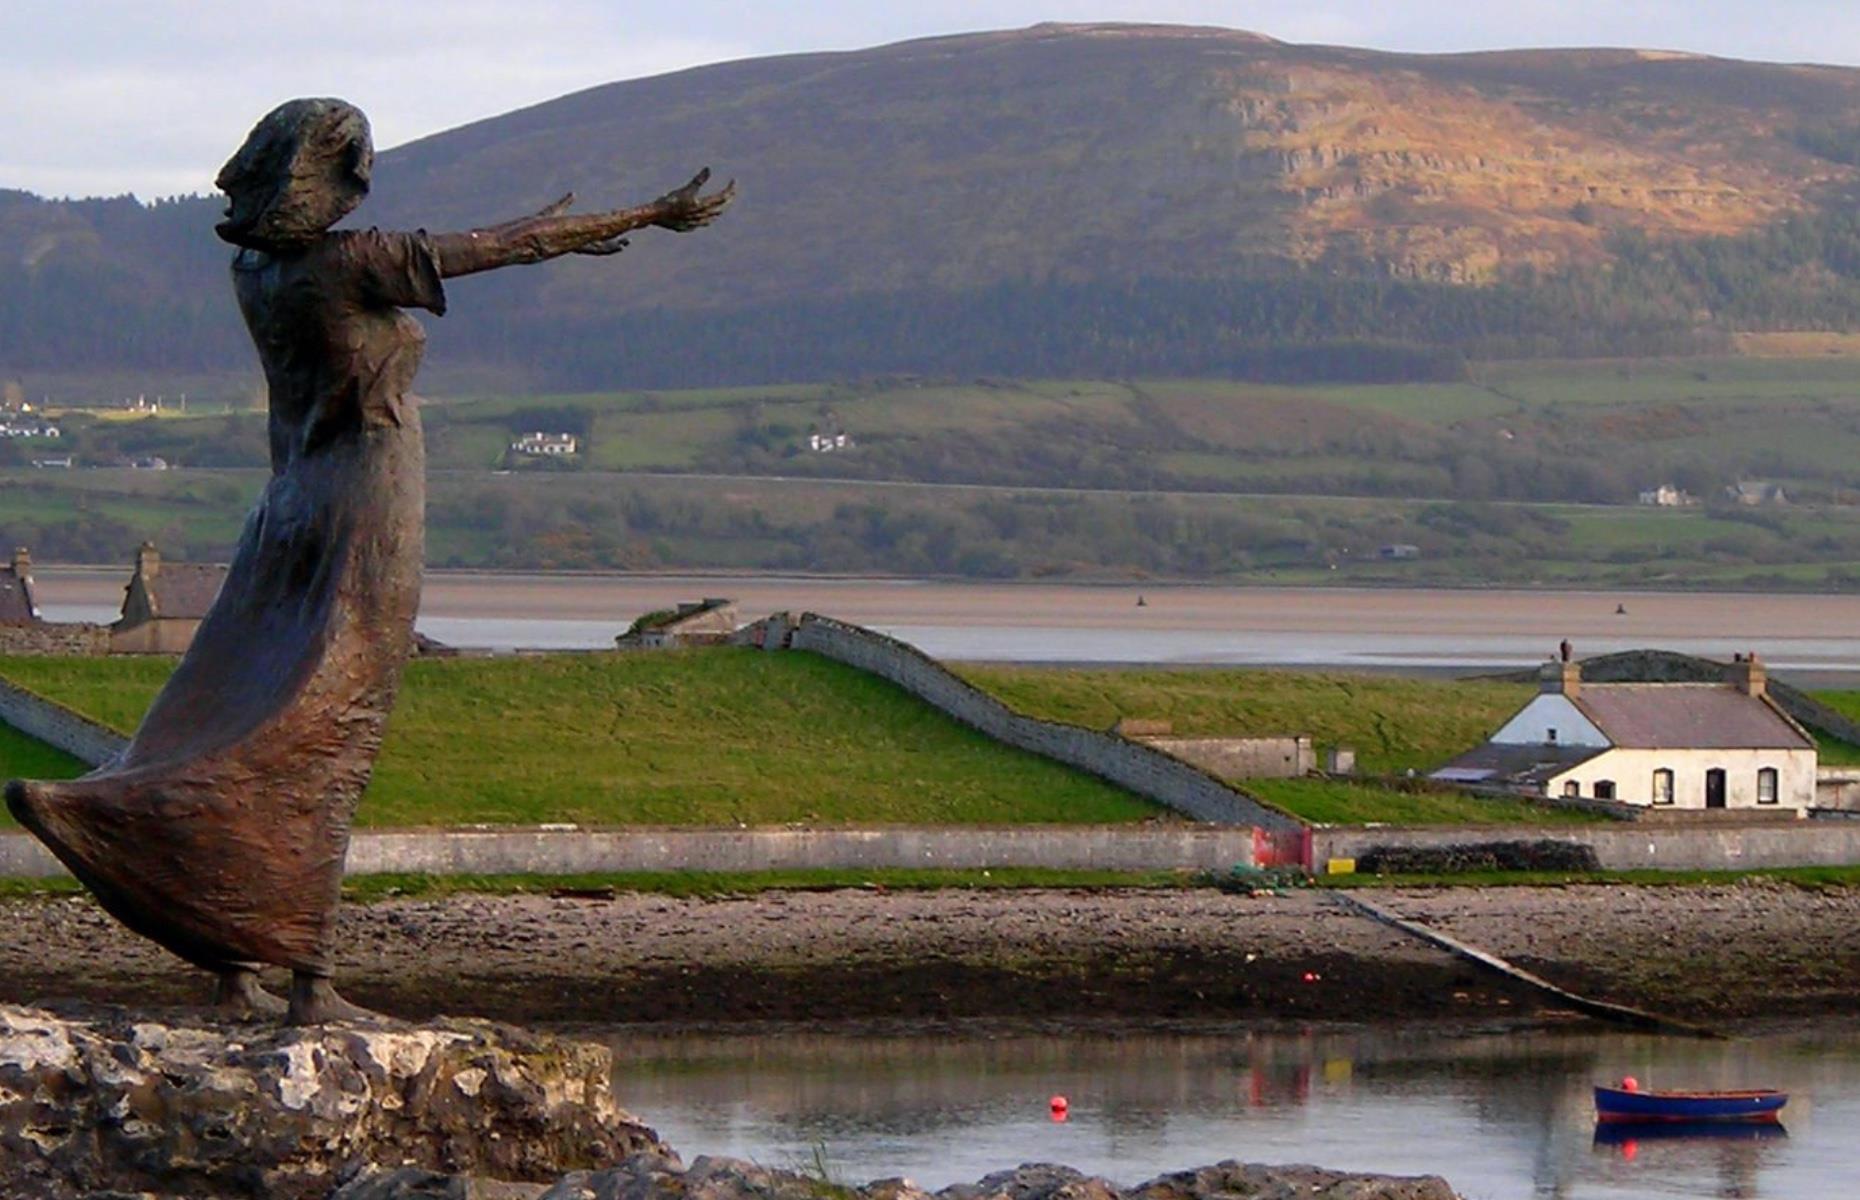 <p>Views of Coney Island and Oyster Island add to the charm of this village and peninsula in County Sligo, set against the backdrop of the spectacular Dartry mountain range. Writer William Butler Yeats and his younger artist brother Jack spent summers at Elsinore House, inspired by the local scenery. Notable landmarks include the Metal Man lighthouse built in 1921 at the entrance to Sligo Harbour. More recently, in 1985, archaeologists have uncovered shipwrecks of the Spanish Armada here, dating to 1588. </p>  <p><a href="https://www.loveexploring.com/galleries/107715/the-worlds-most-extraordinarily-beautiful-shipwrecks?page=1"><strong>These are the world's most beautiful shipwrecks</strong></a></p>